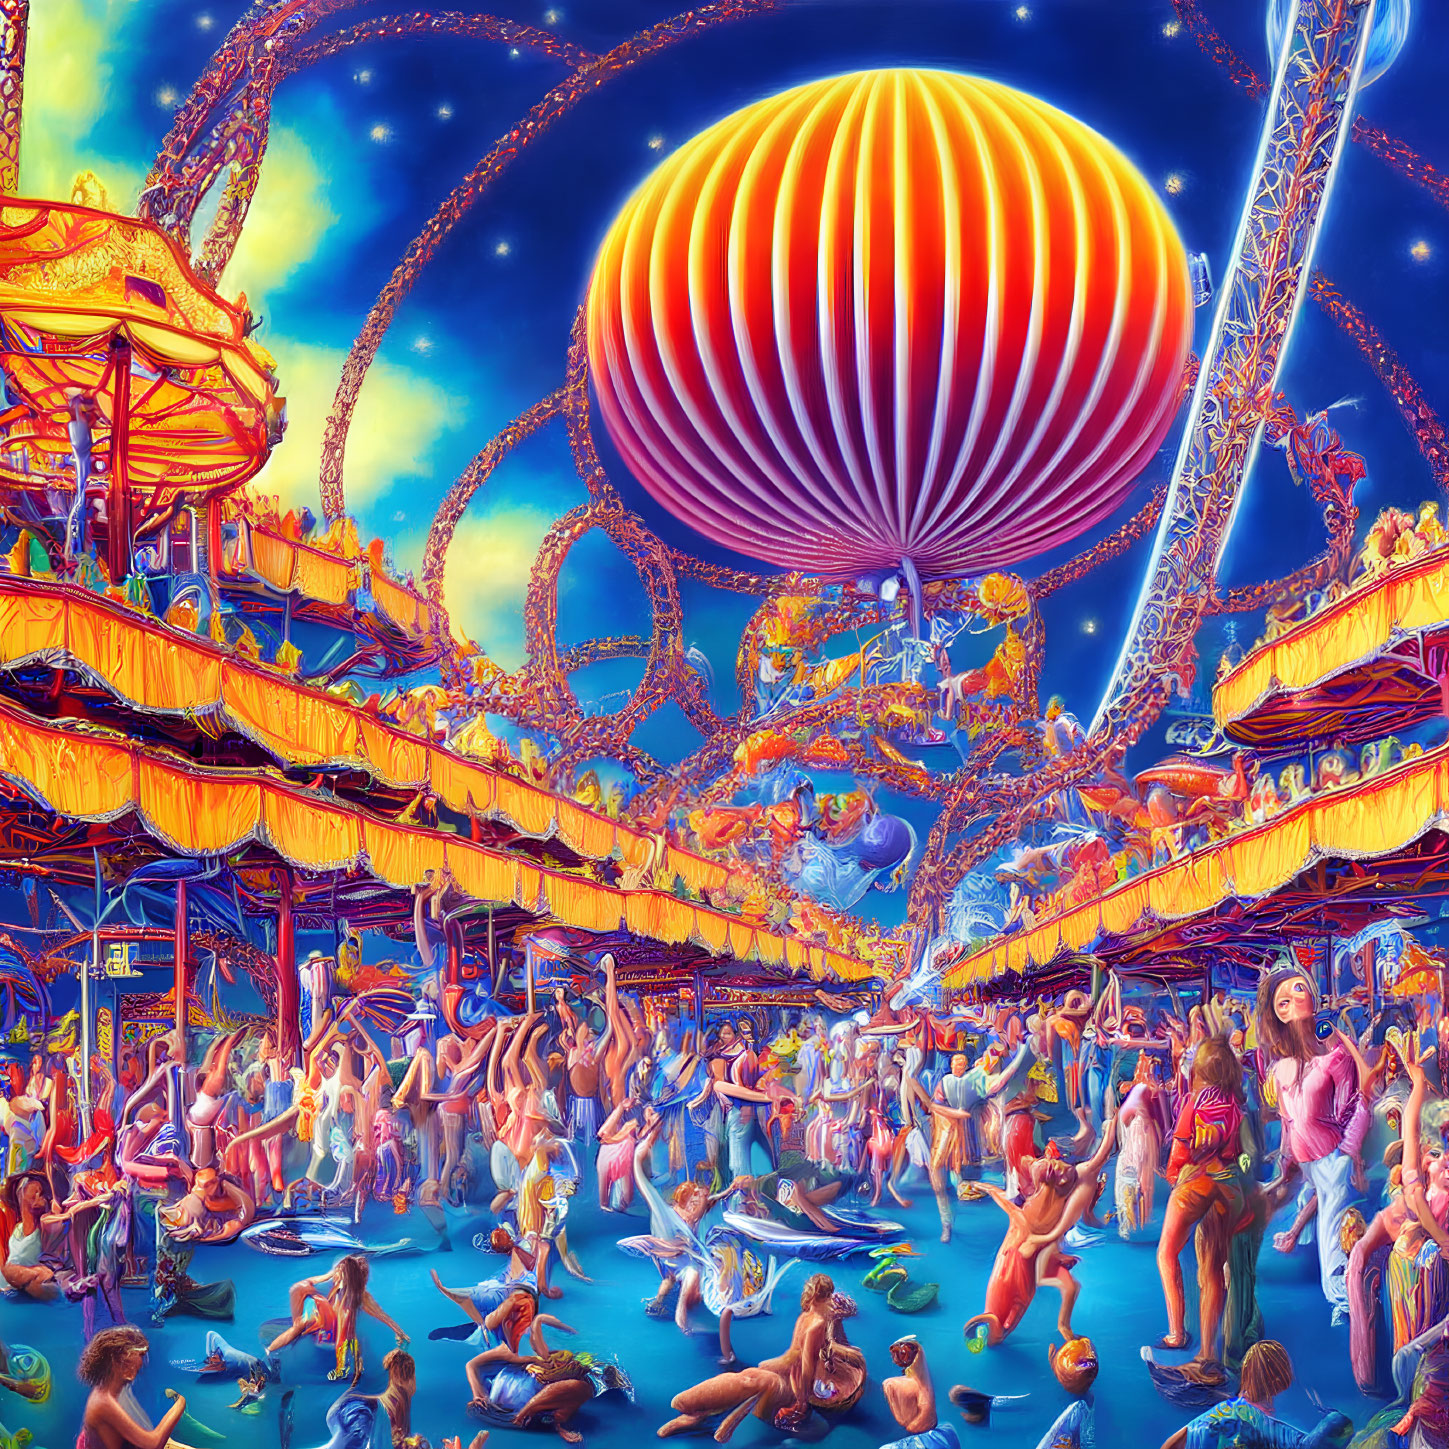 Colorful carnival scene with hot air balloon under starry sky